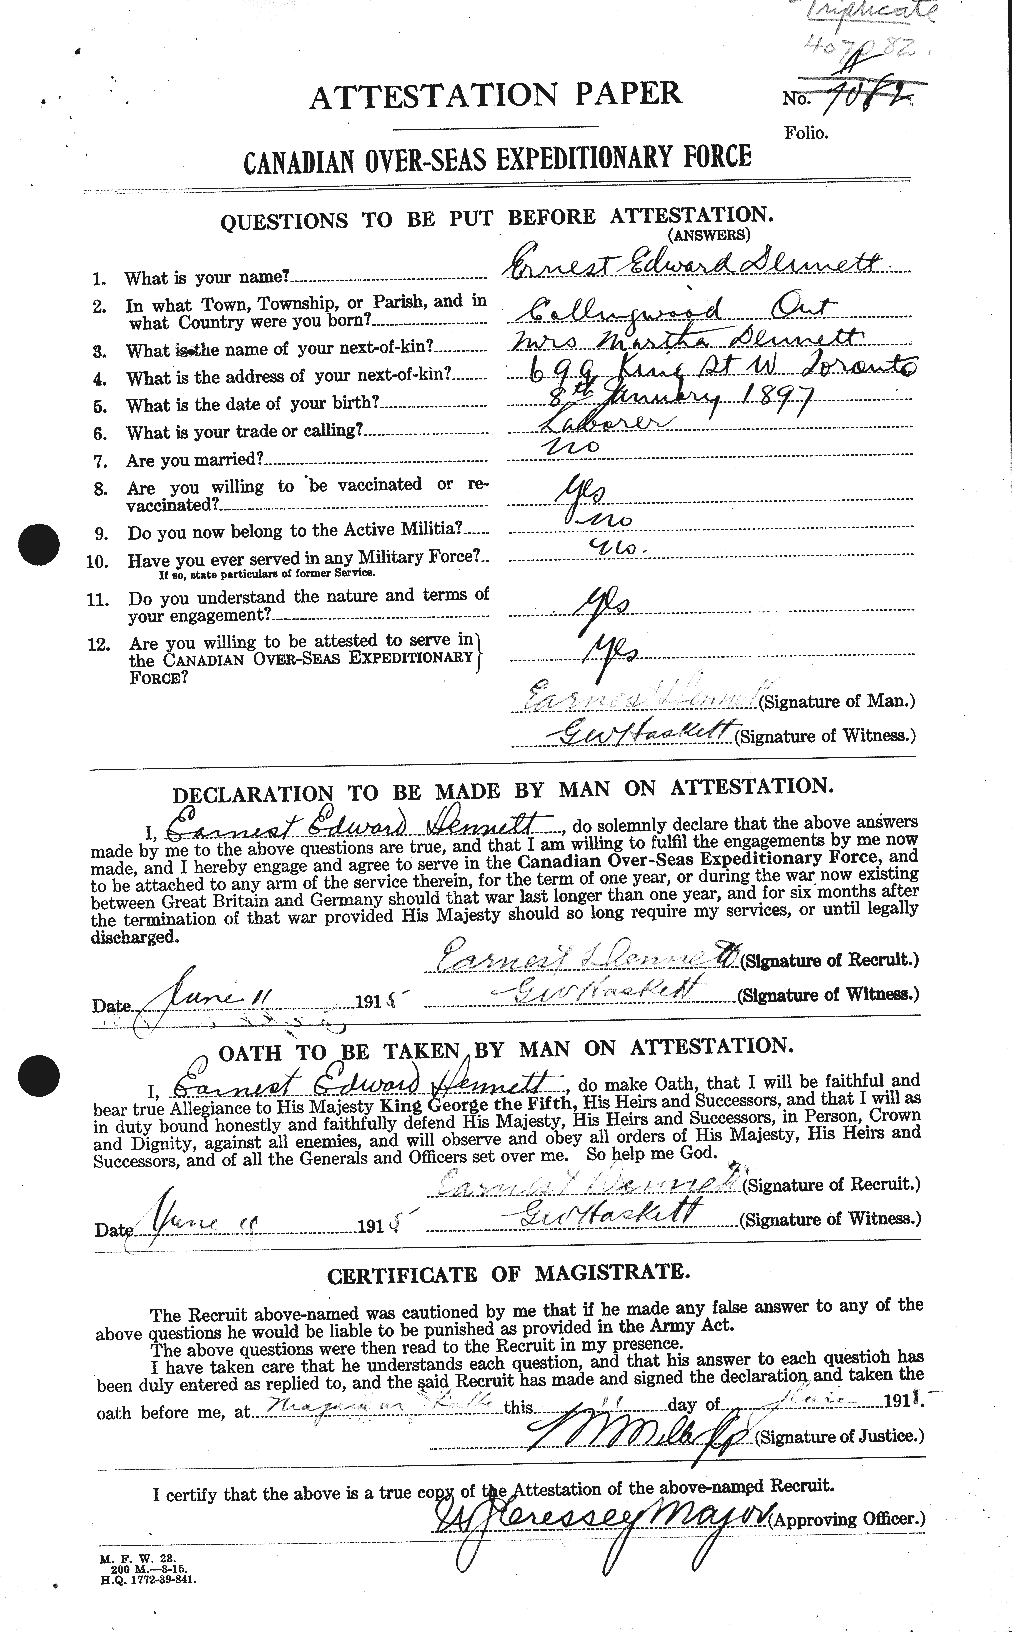 Personnel Records of the First World War - CEF 286072a